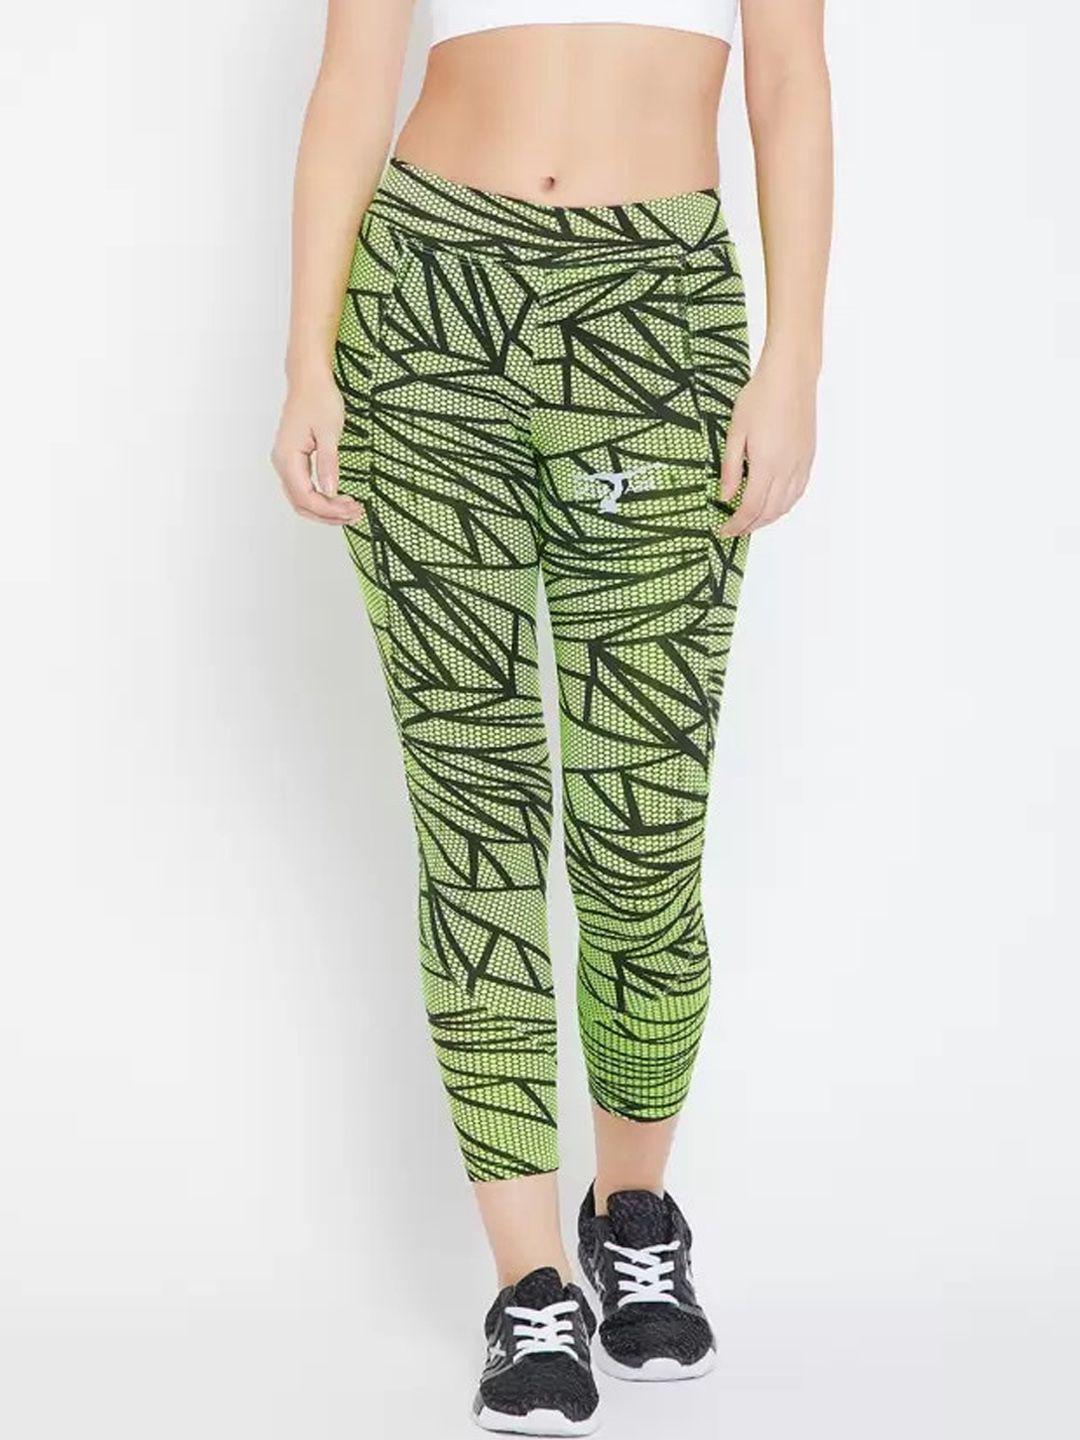 bitterlime women printed ankle-length gym tights